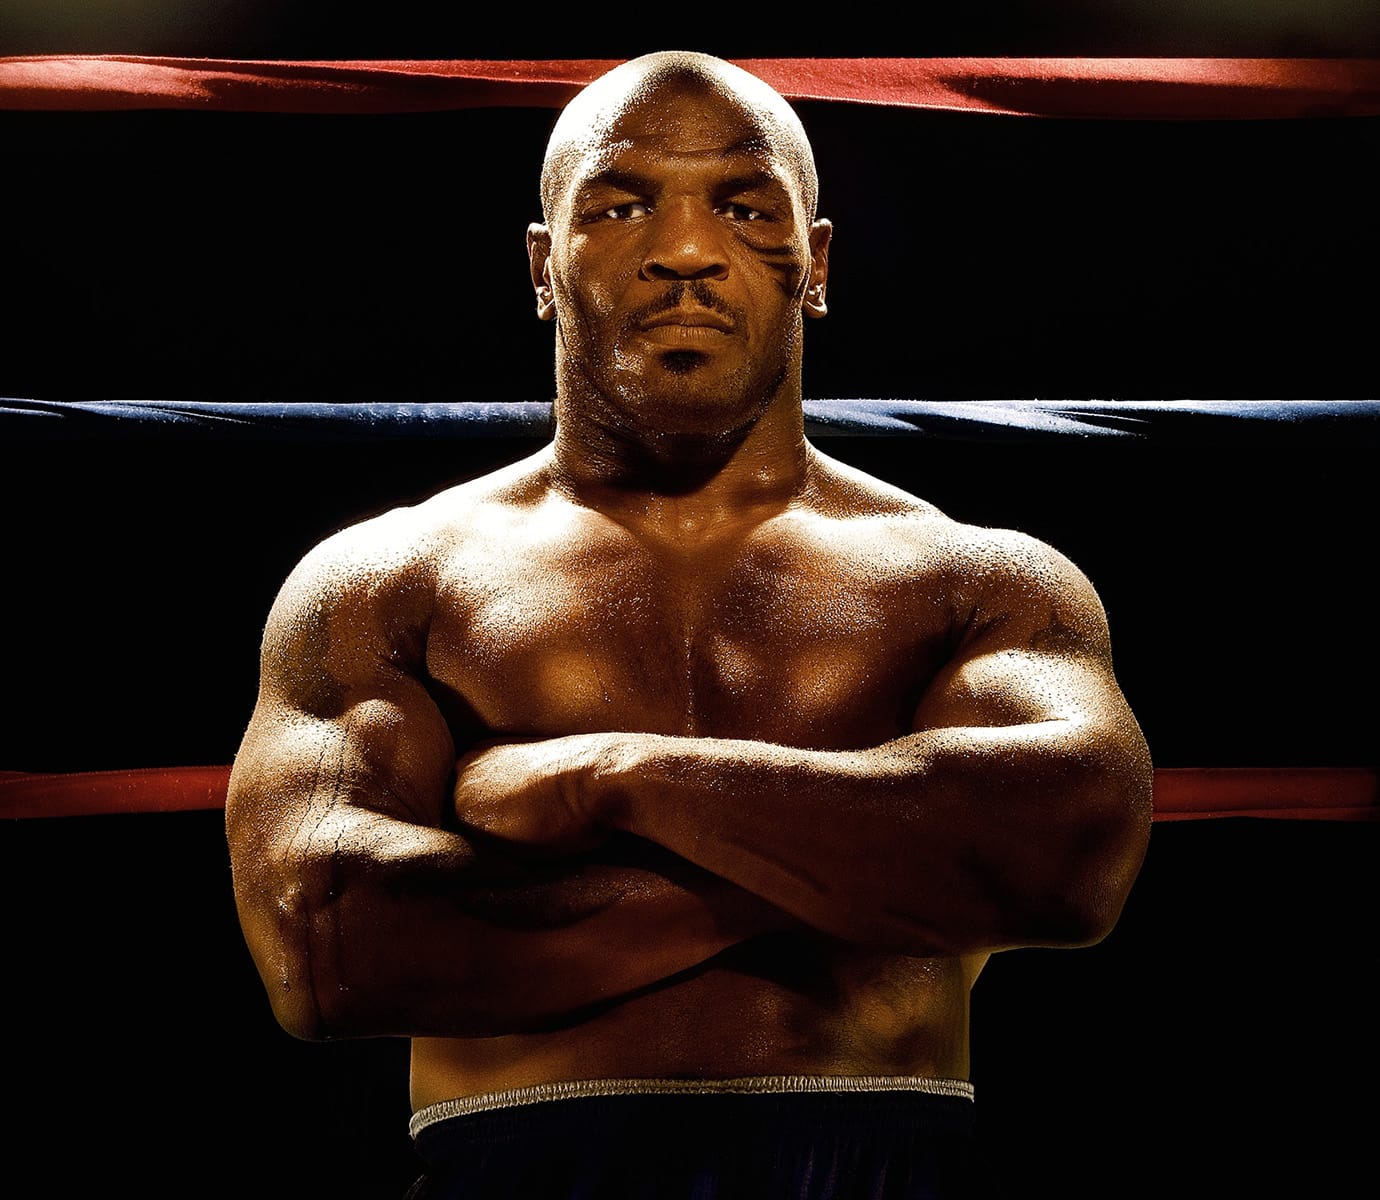 Mike Tyson by celebrity photographer Blair Bunting